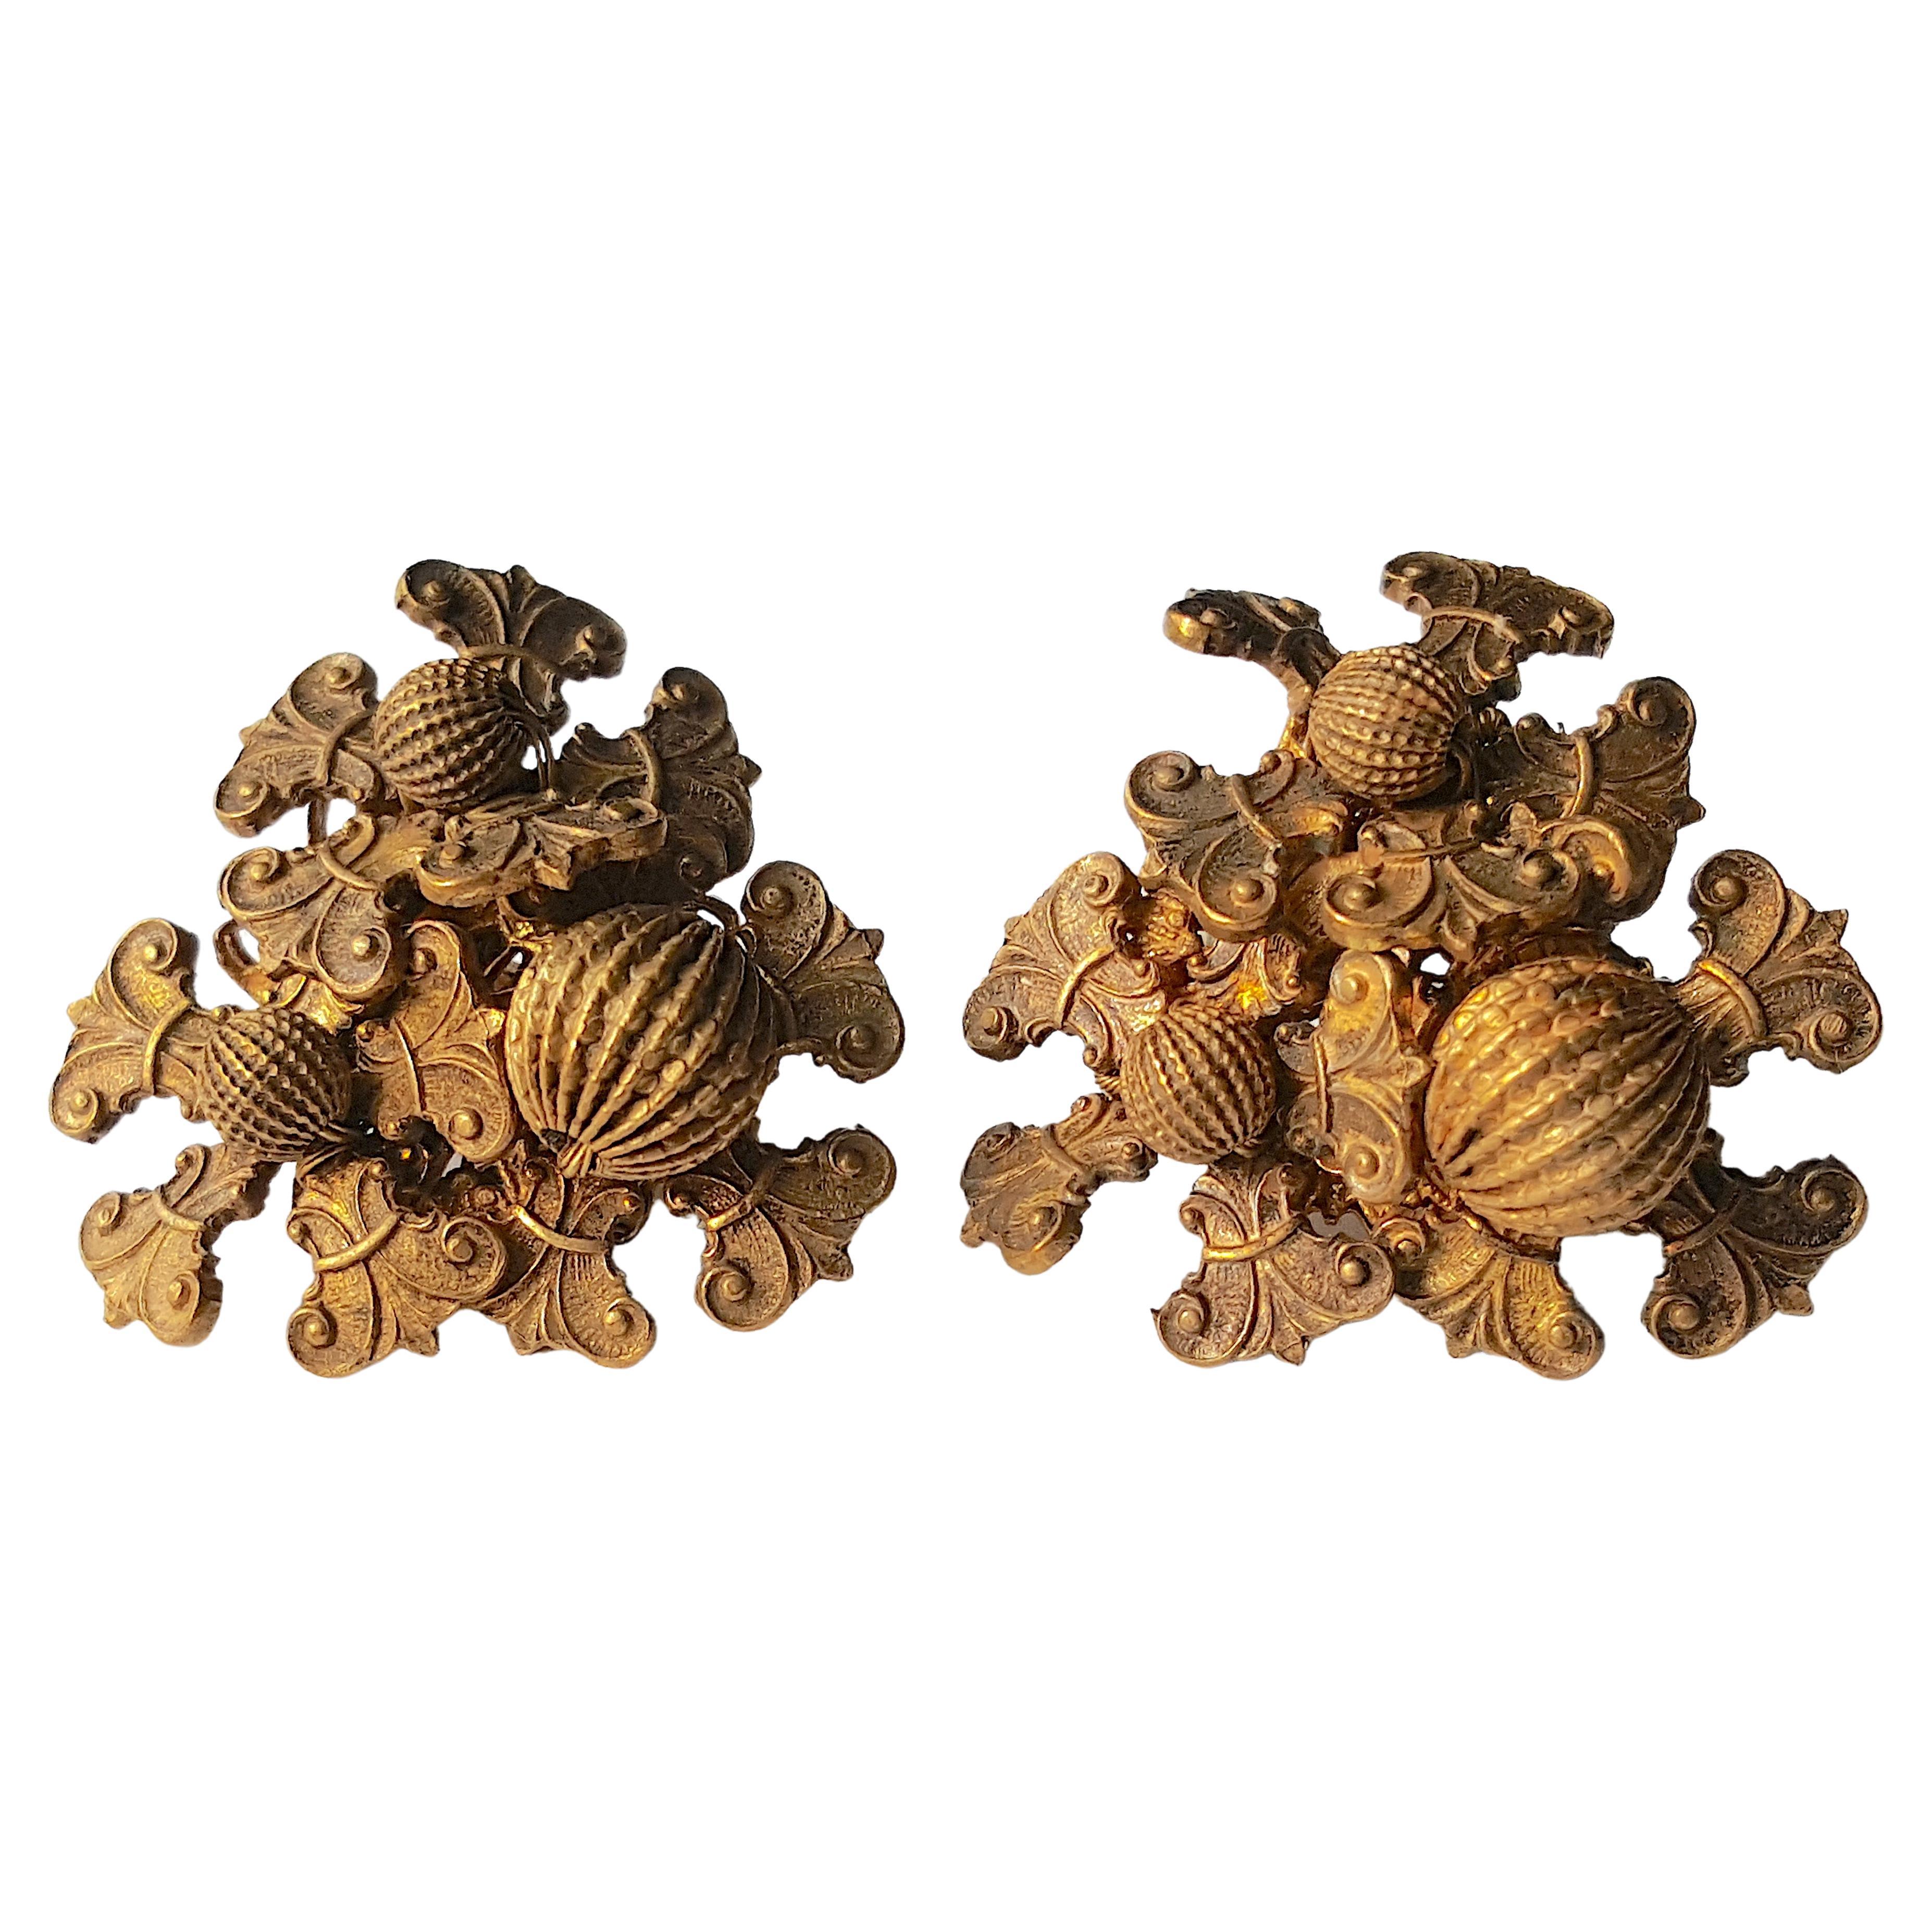 With the earliest brand signature from 1947-1949, these Miriam Haskell (1899-1981) hand-wired Russsian-gilt brass floral French-wire-clip earrings were created by her first designer Frank Hess. On the metal ear-pad attached to their hallmark